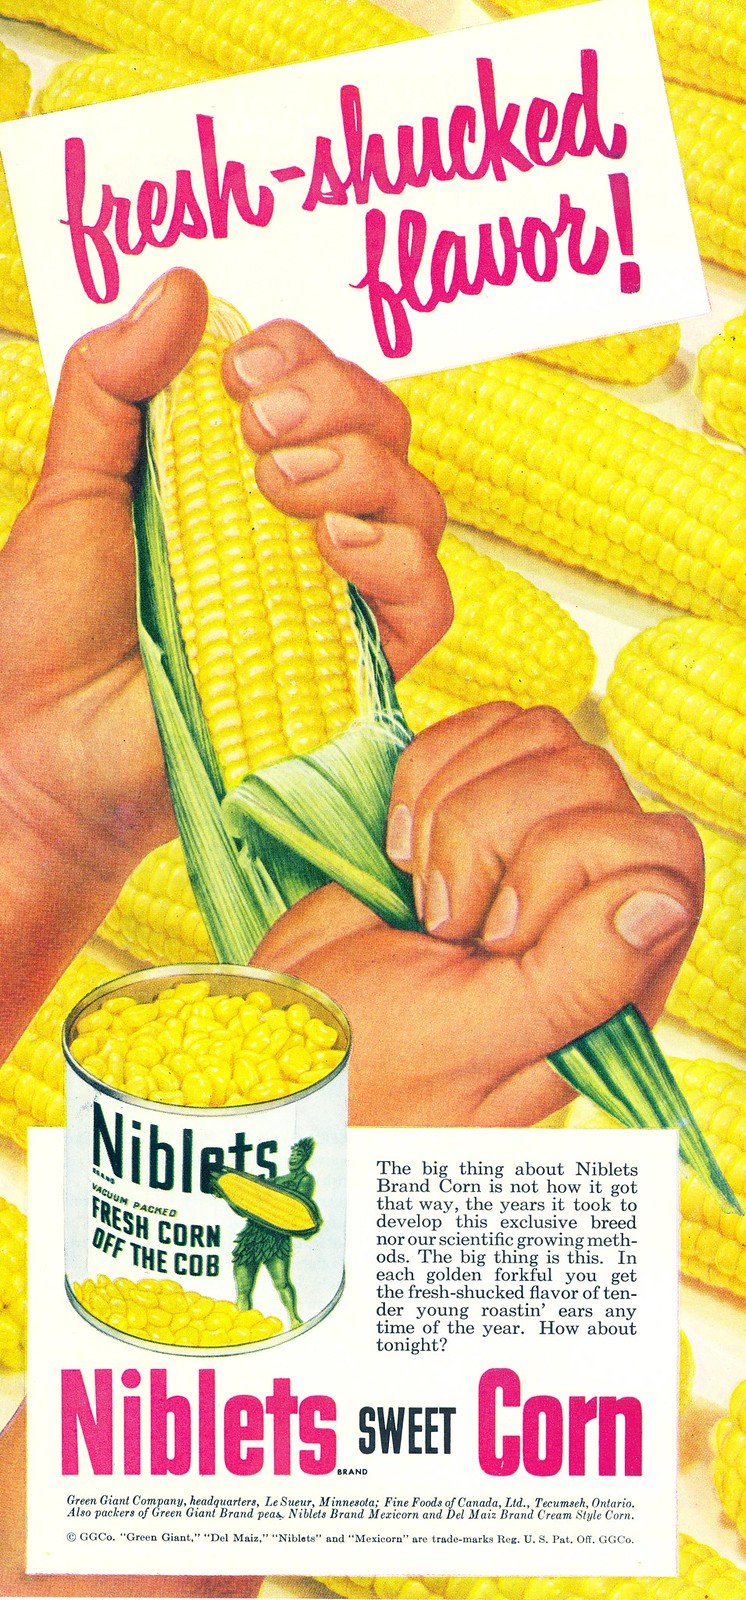 Green Giant Company Niblets Brand - published in Good Housekeeping - March 1951